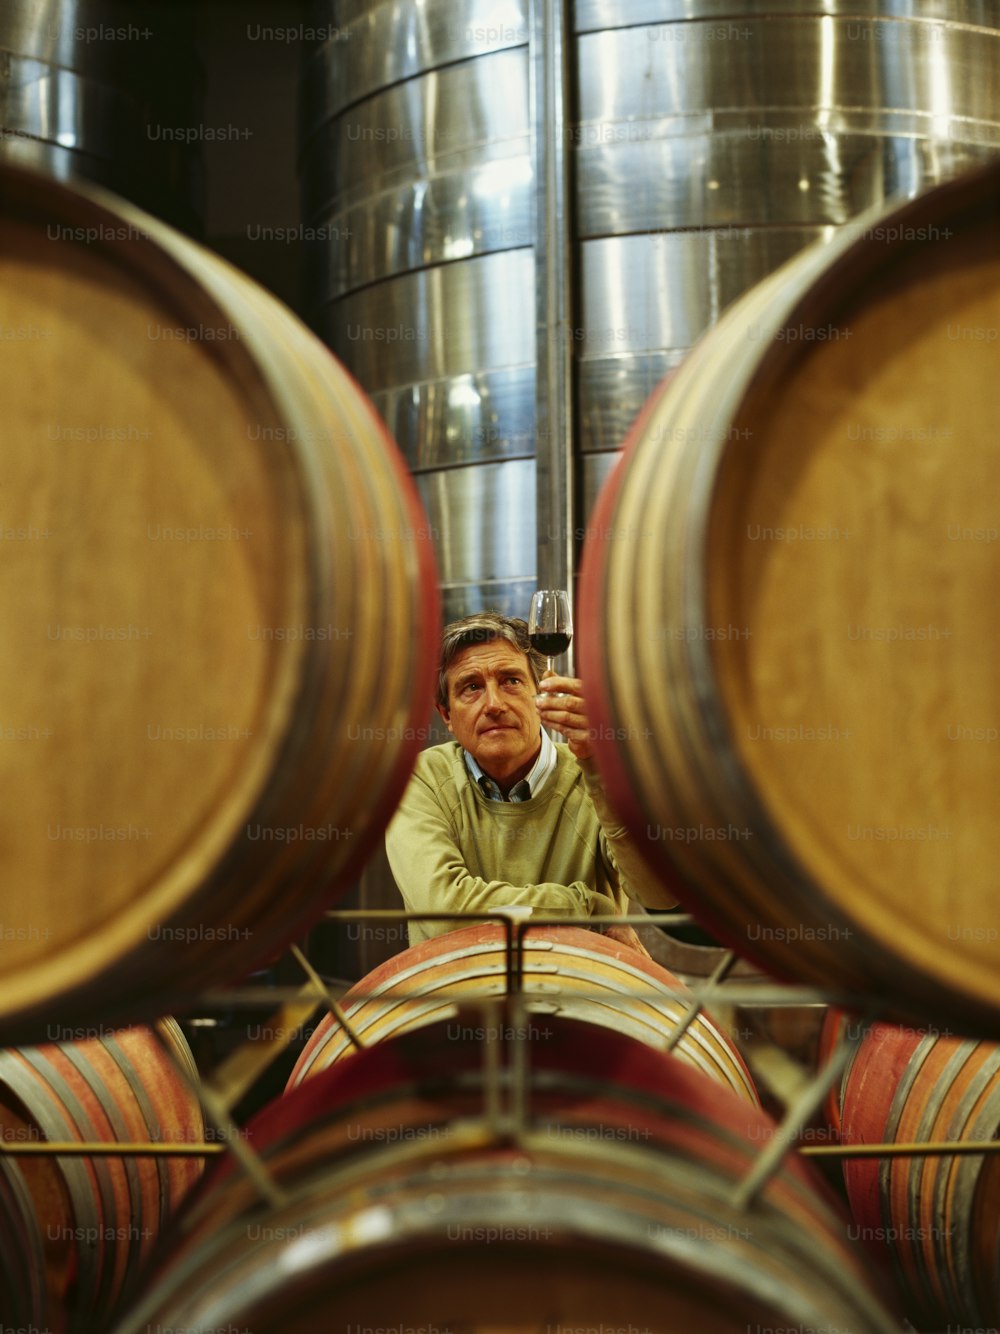 a man sitting in front of a bunch of wine barrels